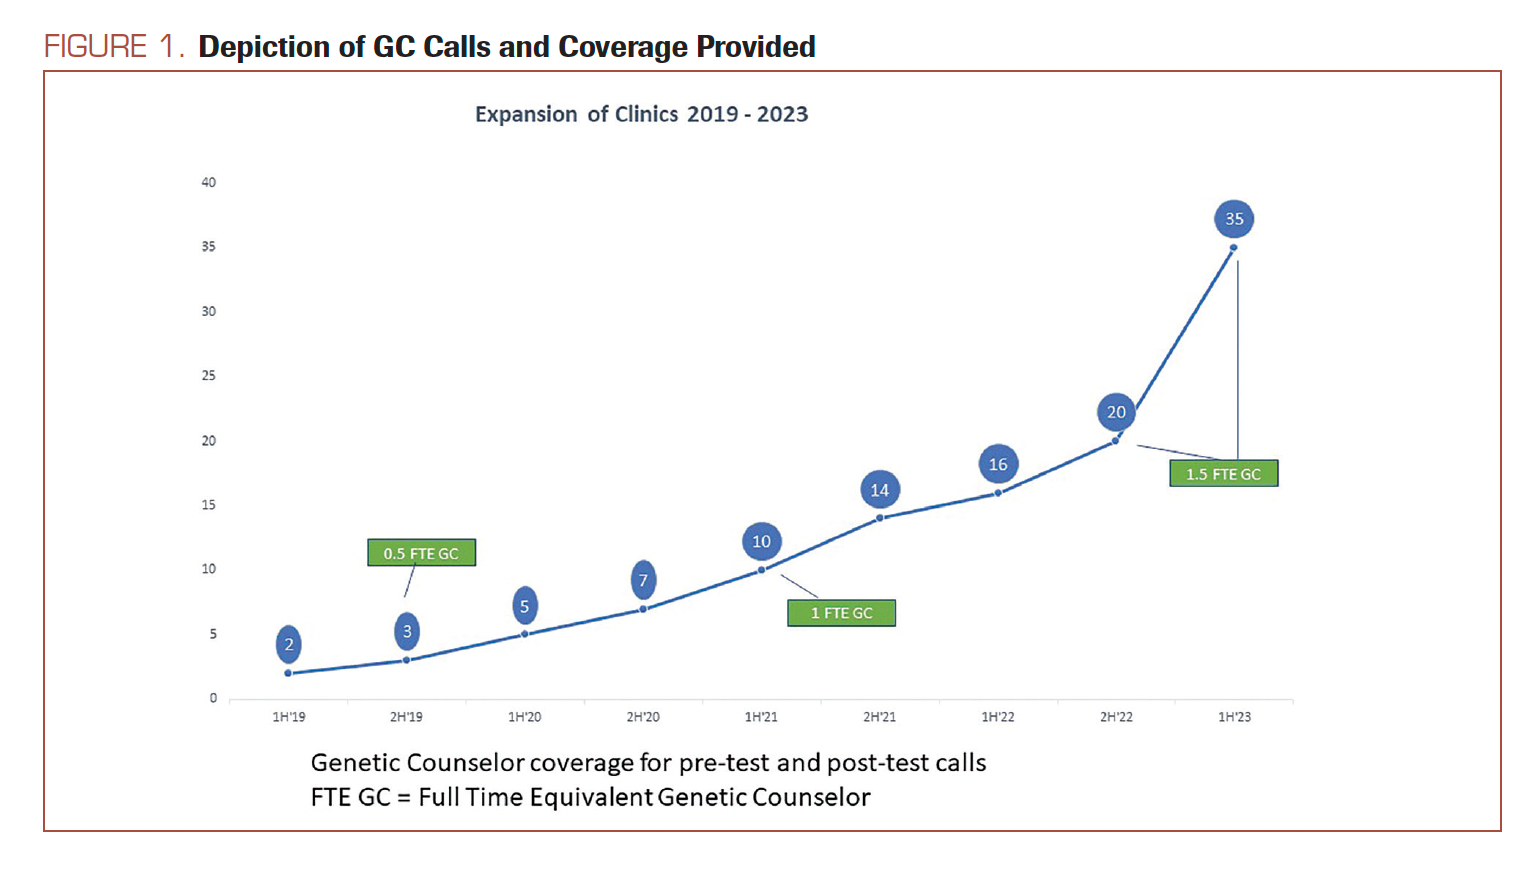 FIGURE 1. Depiction of GC Calls and Coverage Provided